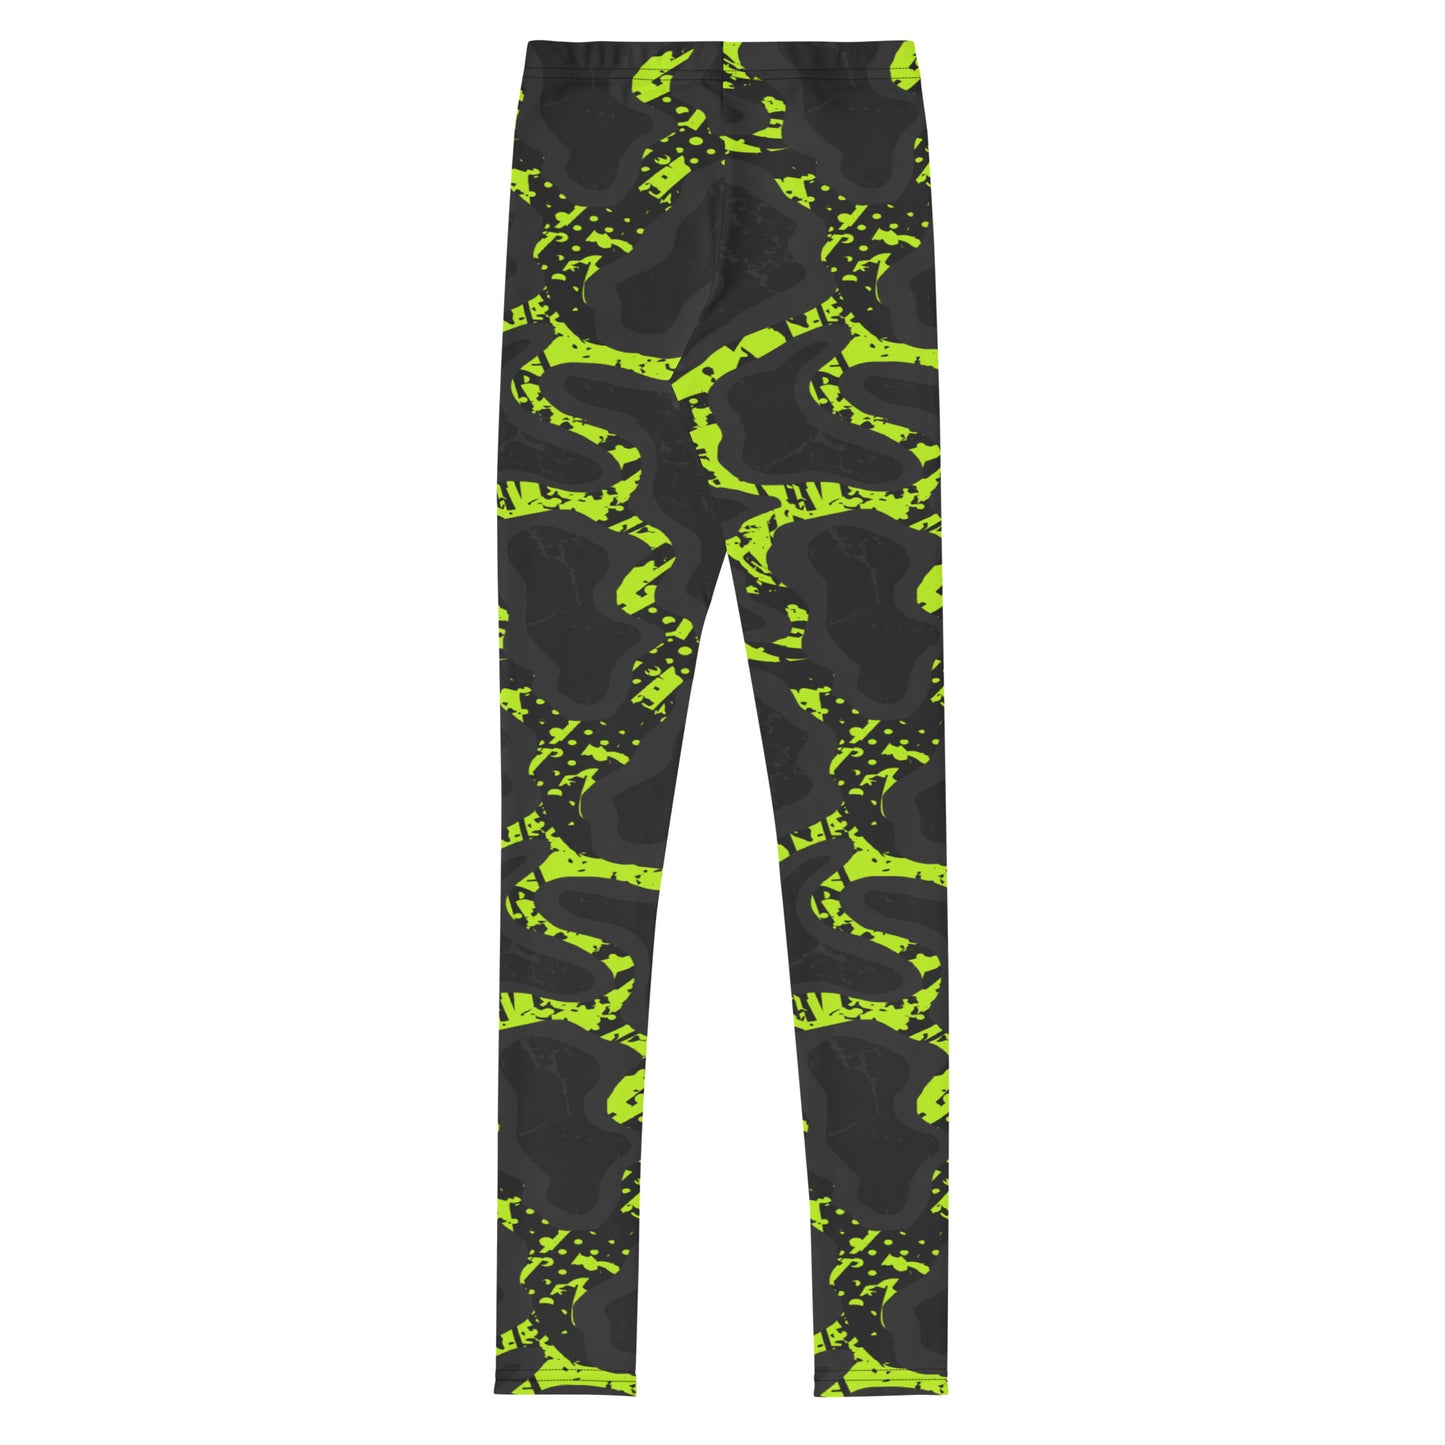 The Gymbum UK QuickDry Green Charge Youth Leggings